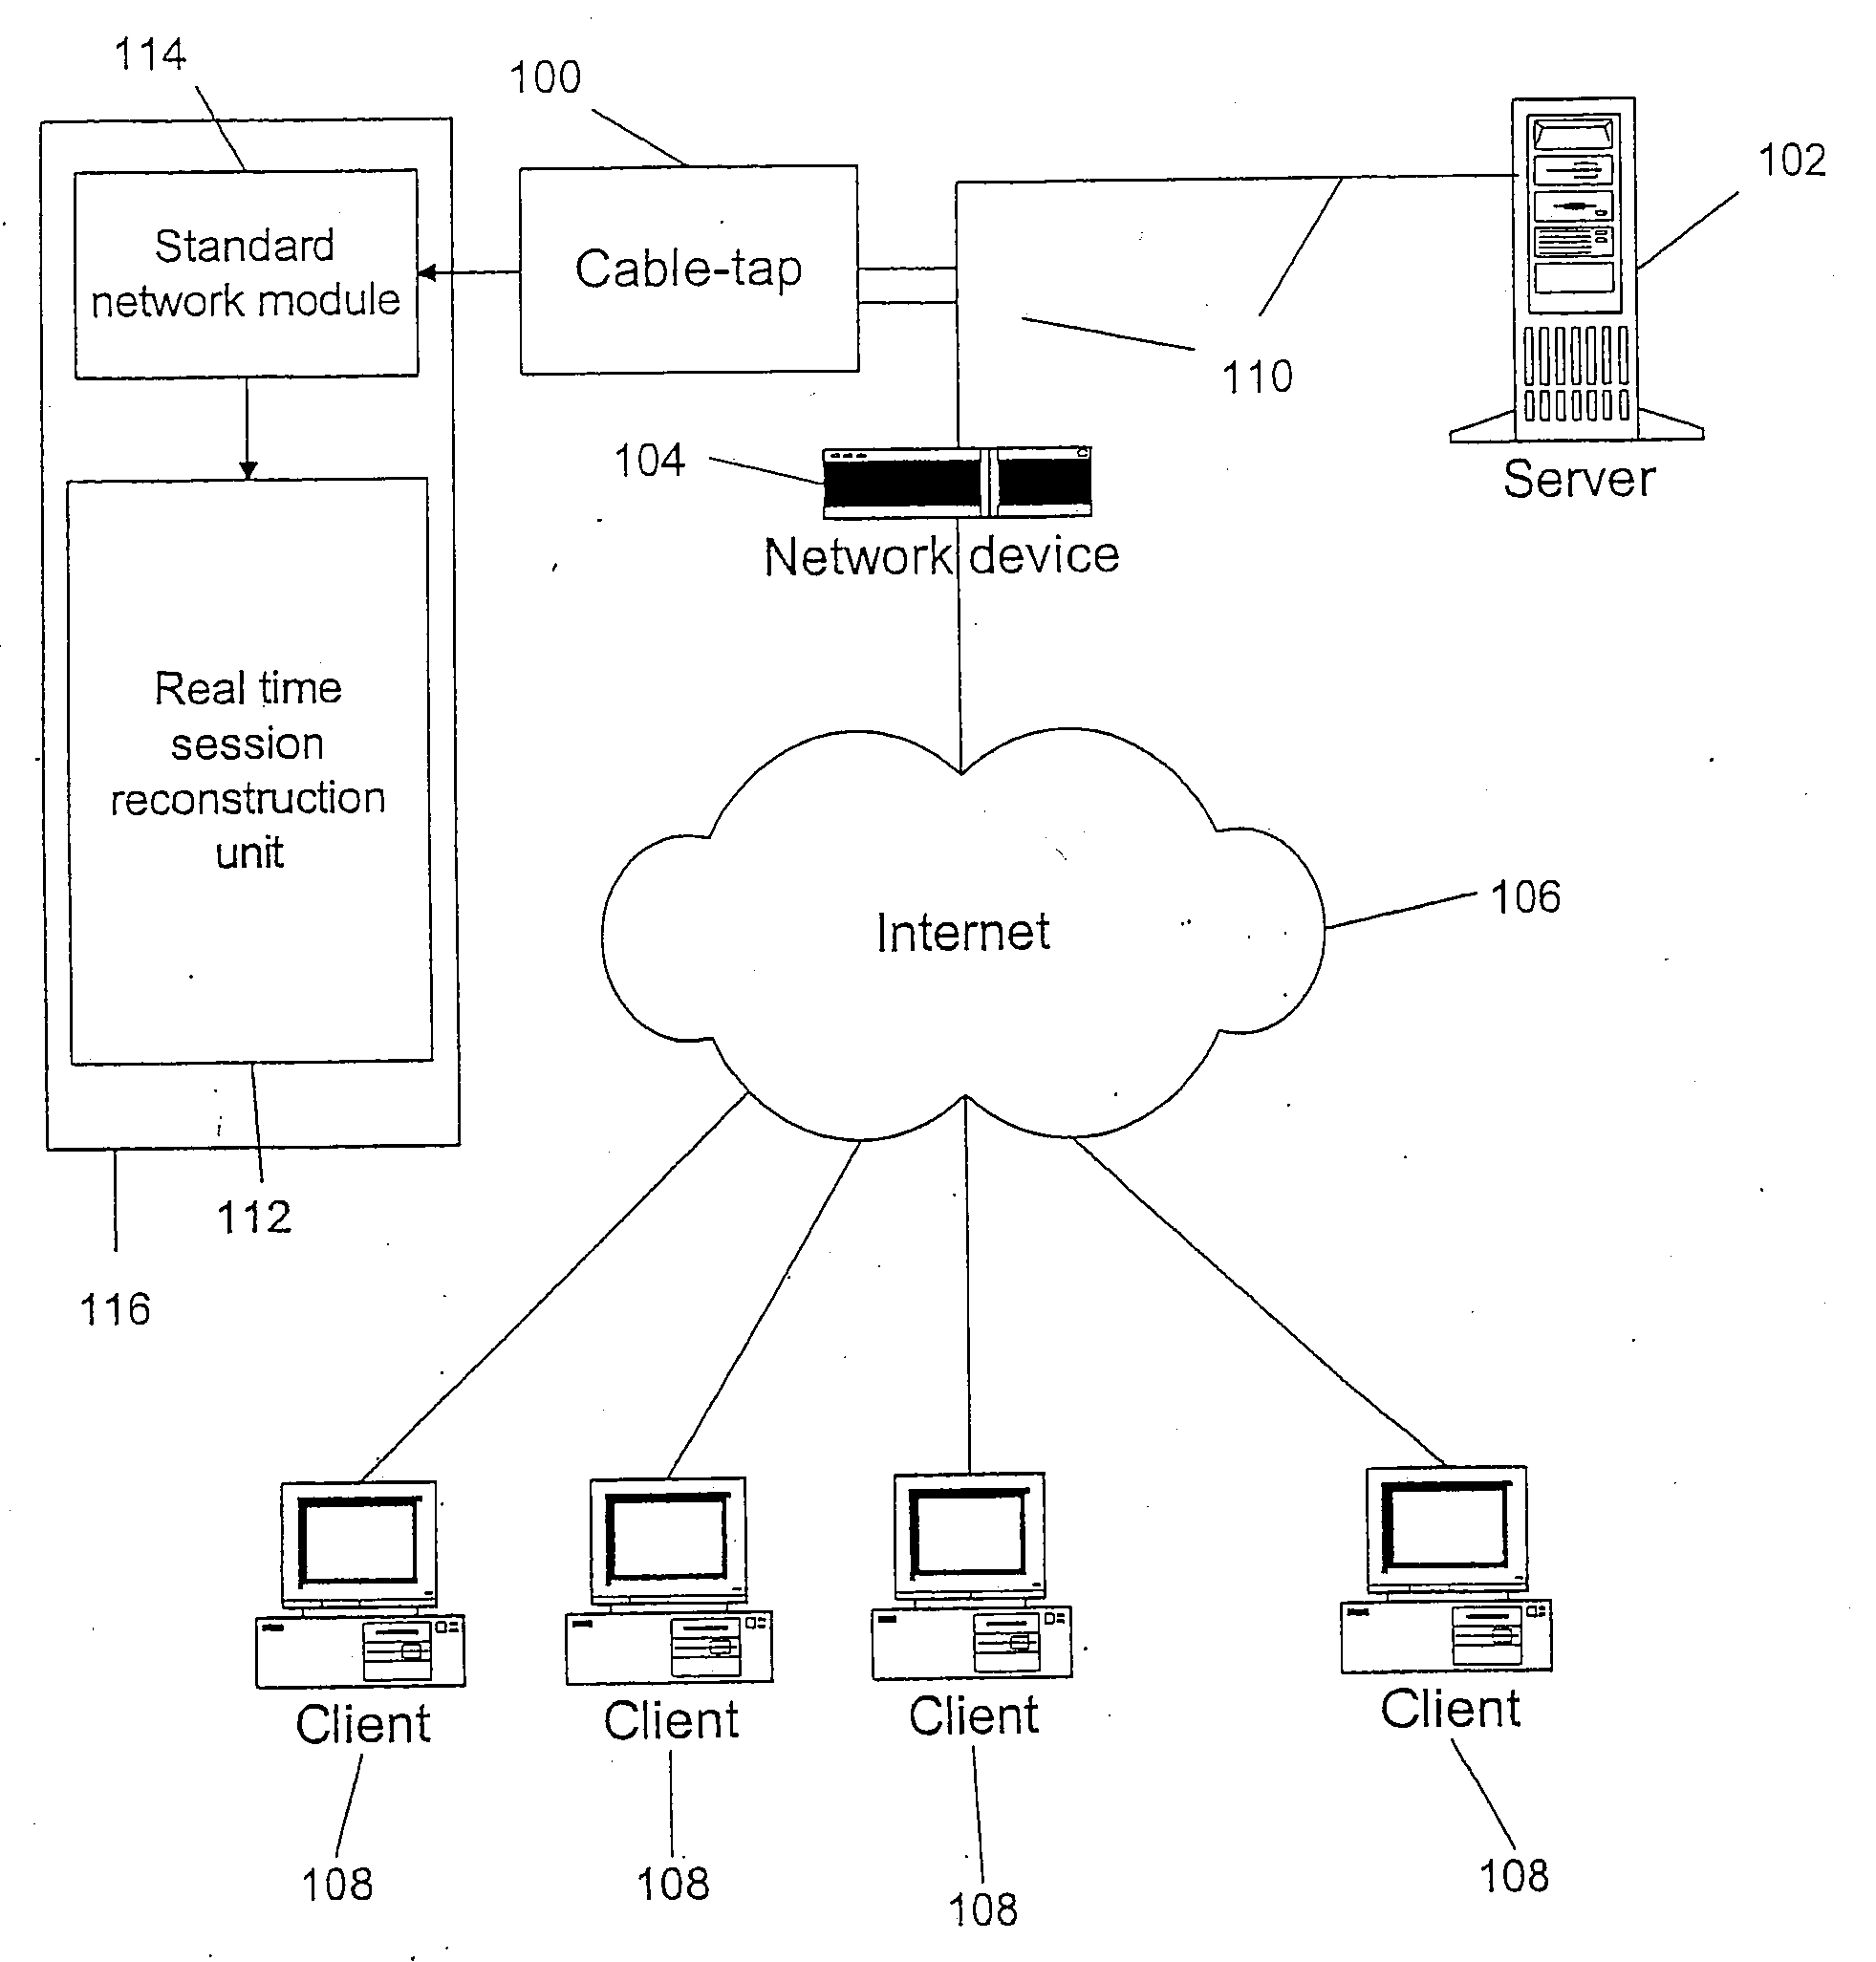 Method of non-intrusive analysis of secure and non-secure web application traffic in real-time